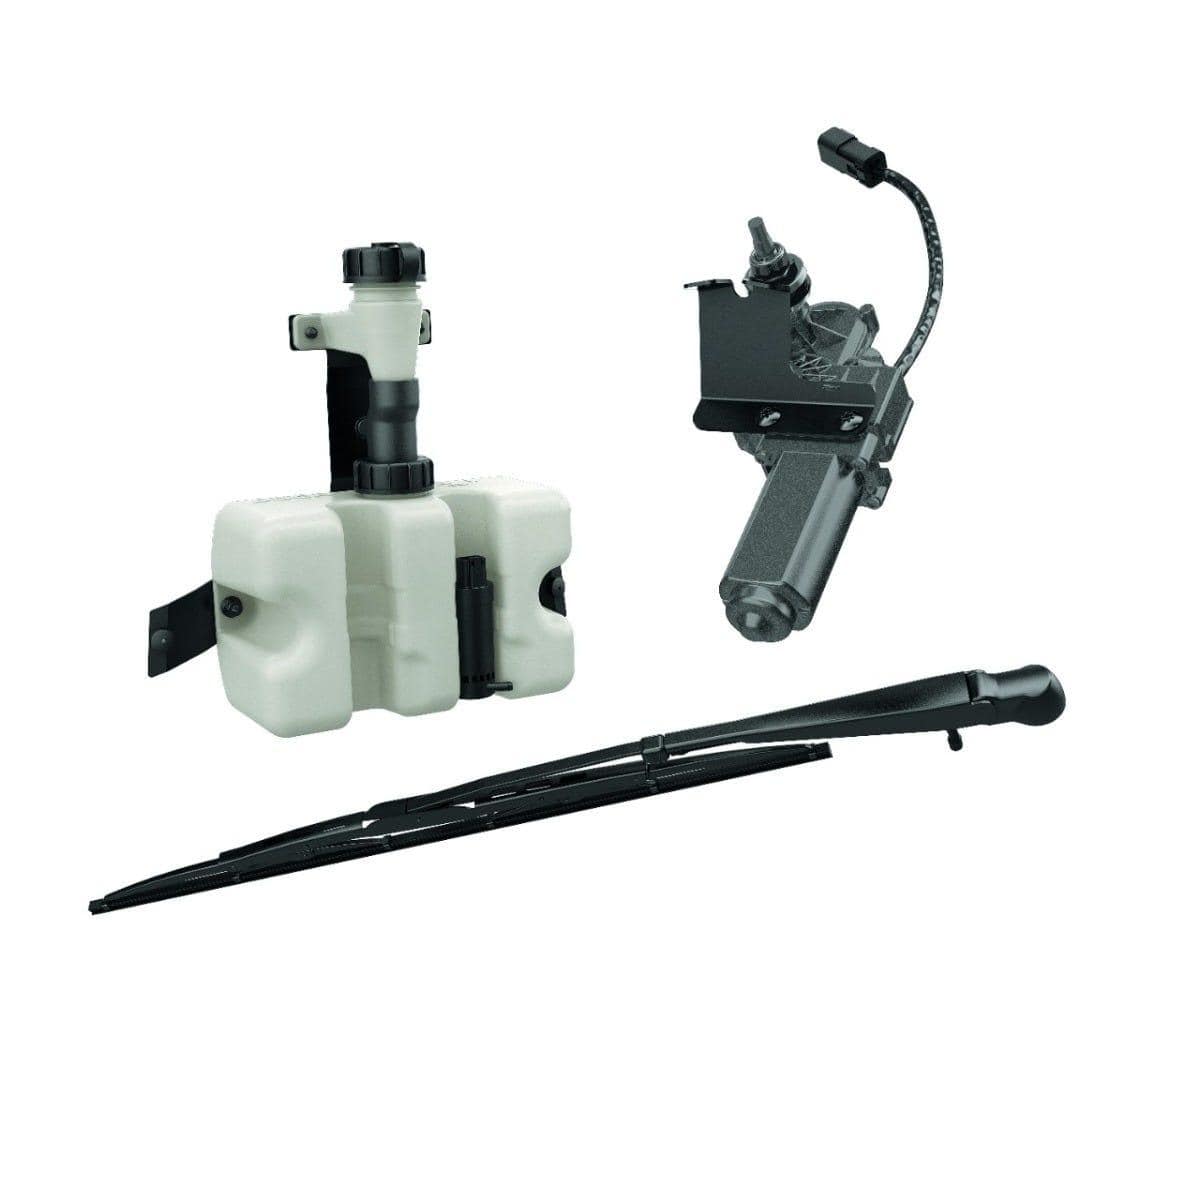 Windshield Wiper and Washer Kit